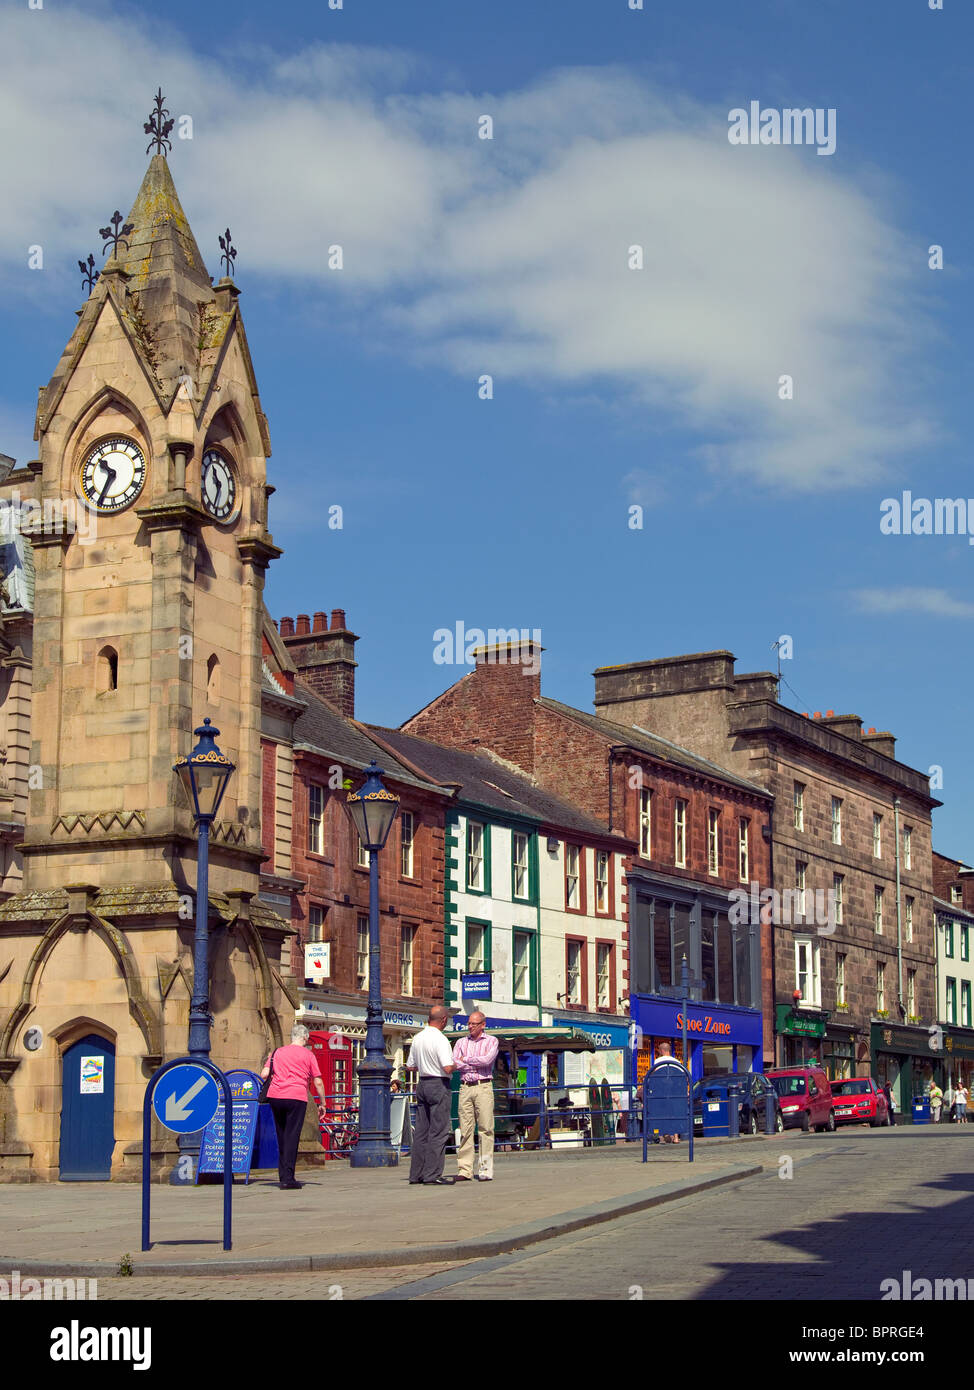 People in town centre in summer Musgrave Monument Market Square Penrith ...